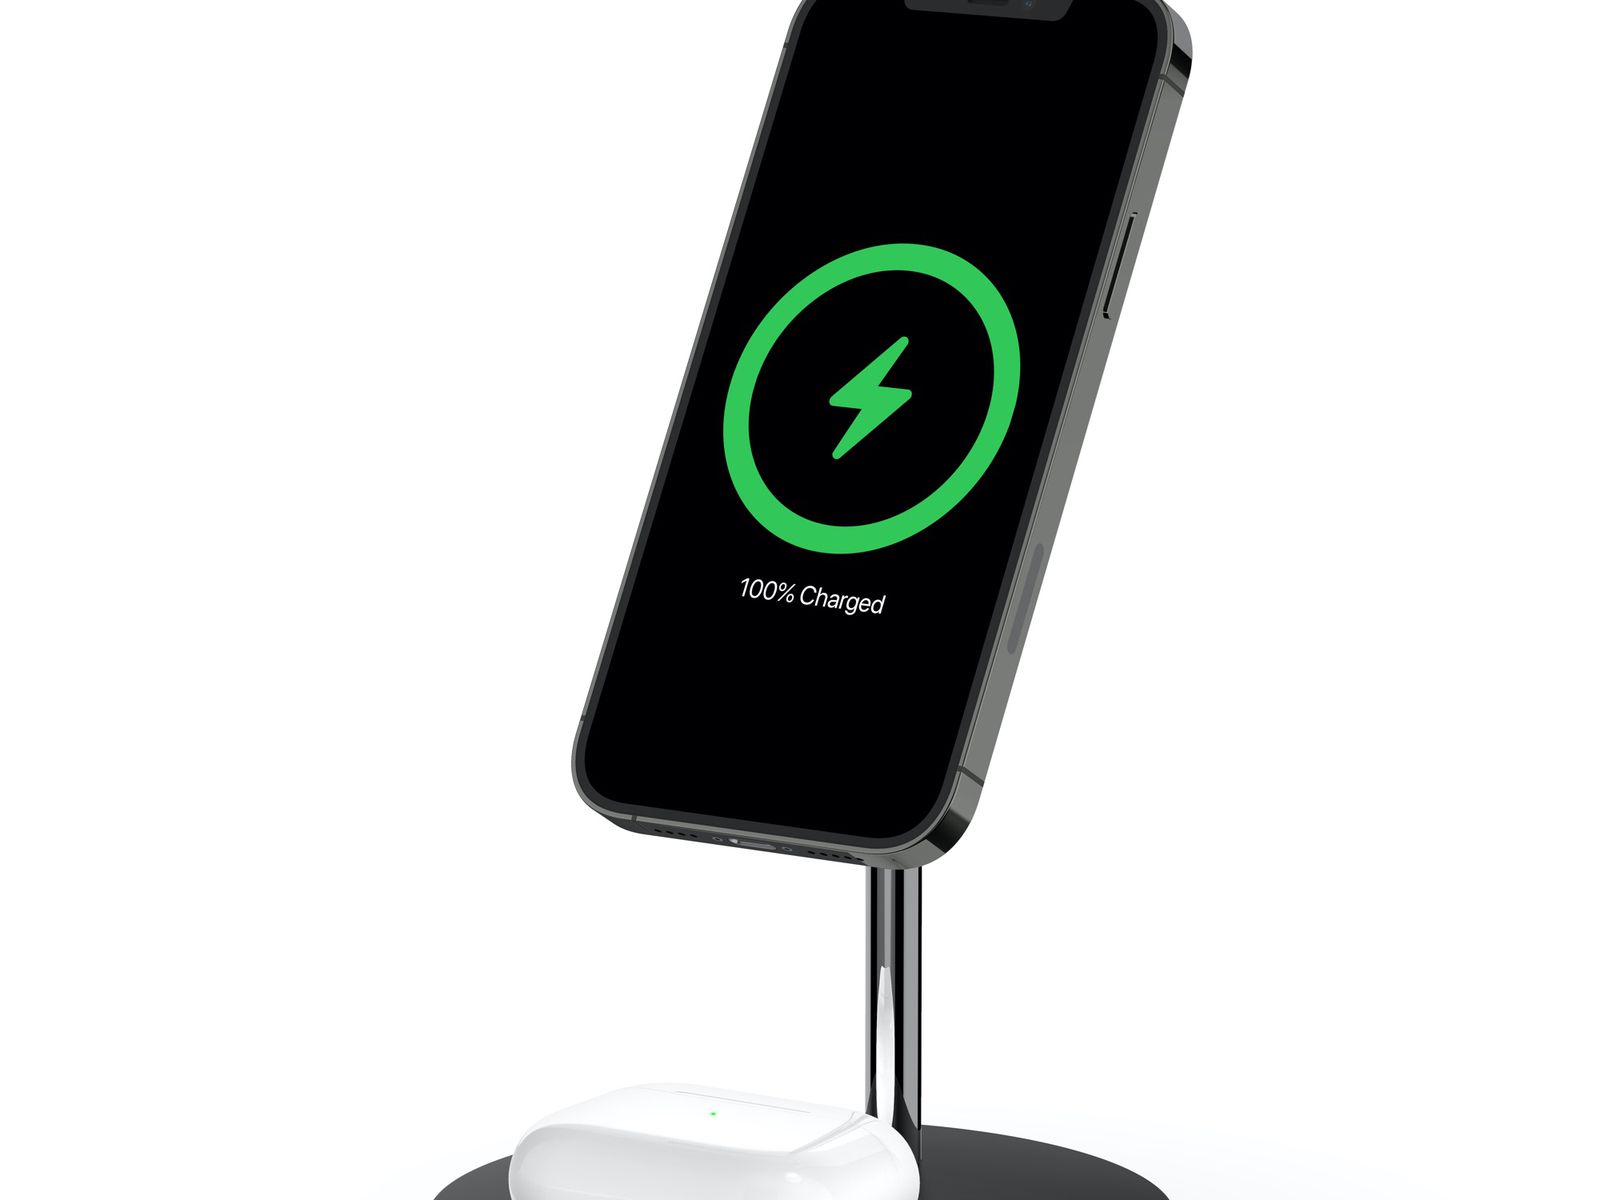 Belkin Launches New MagSafe Charger With Kickstand - MacRumors